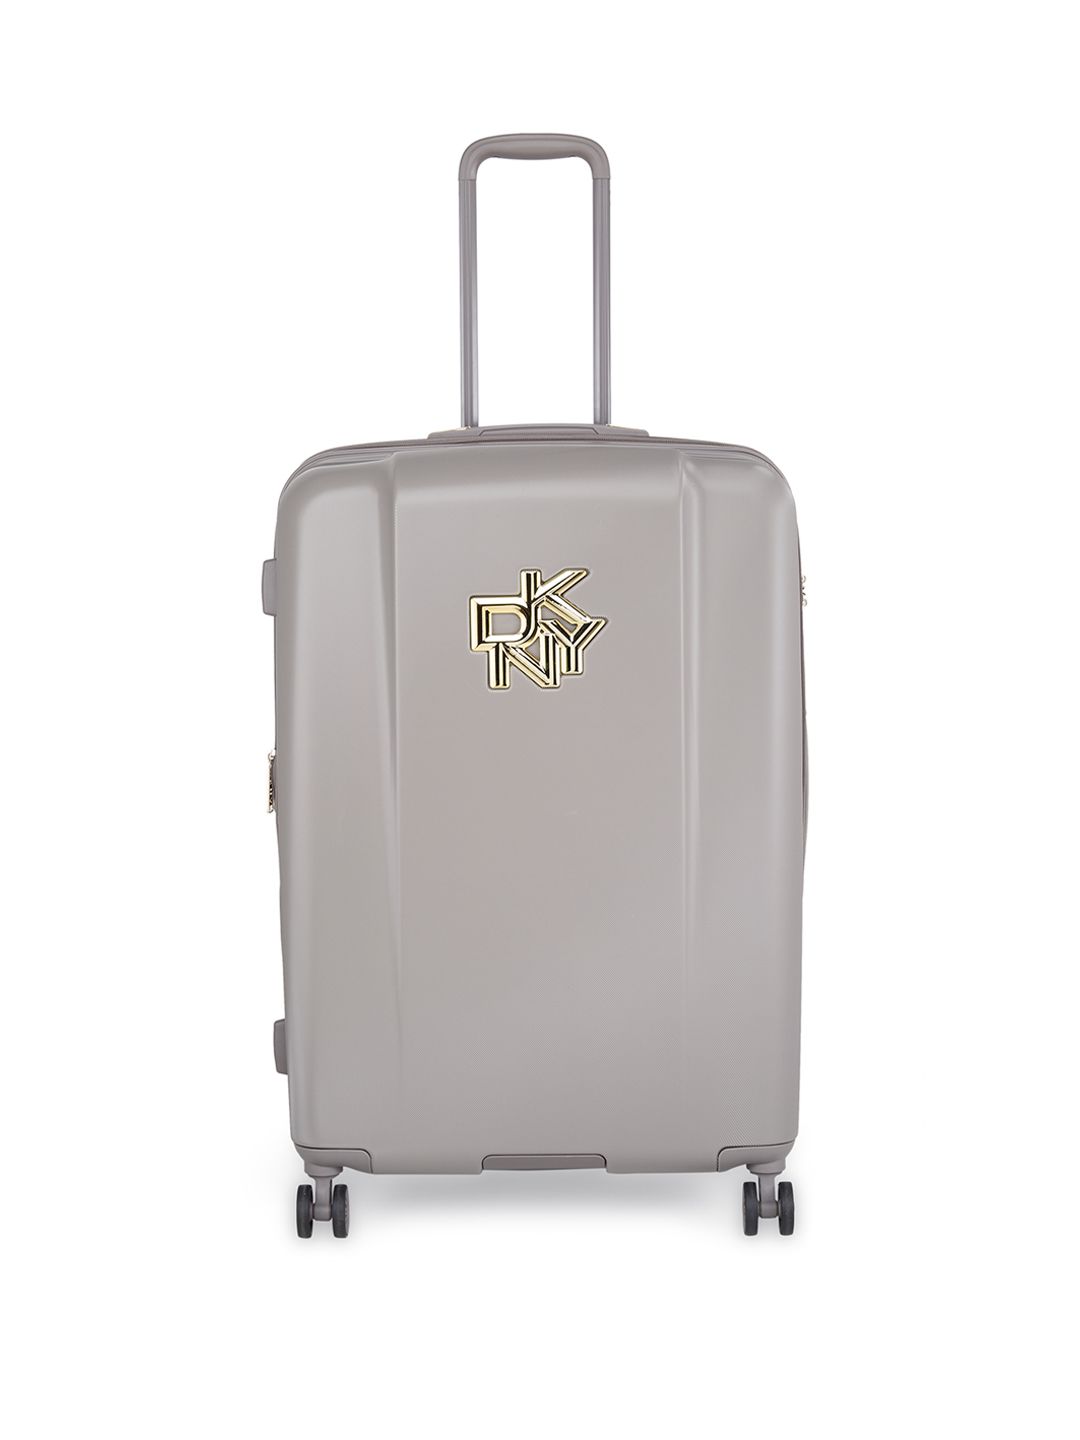 DKNY ALIAS Grey Hard-Sided Trolley Suitcase Price in India